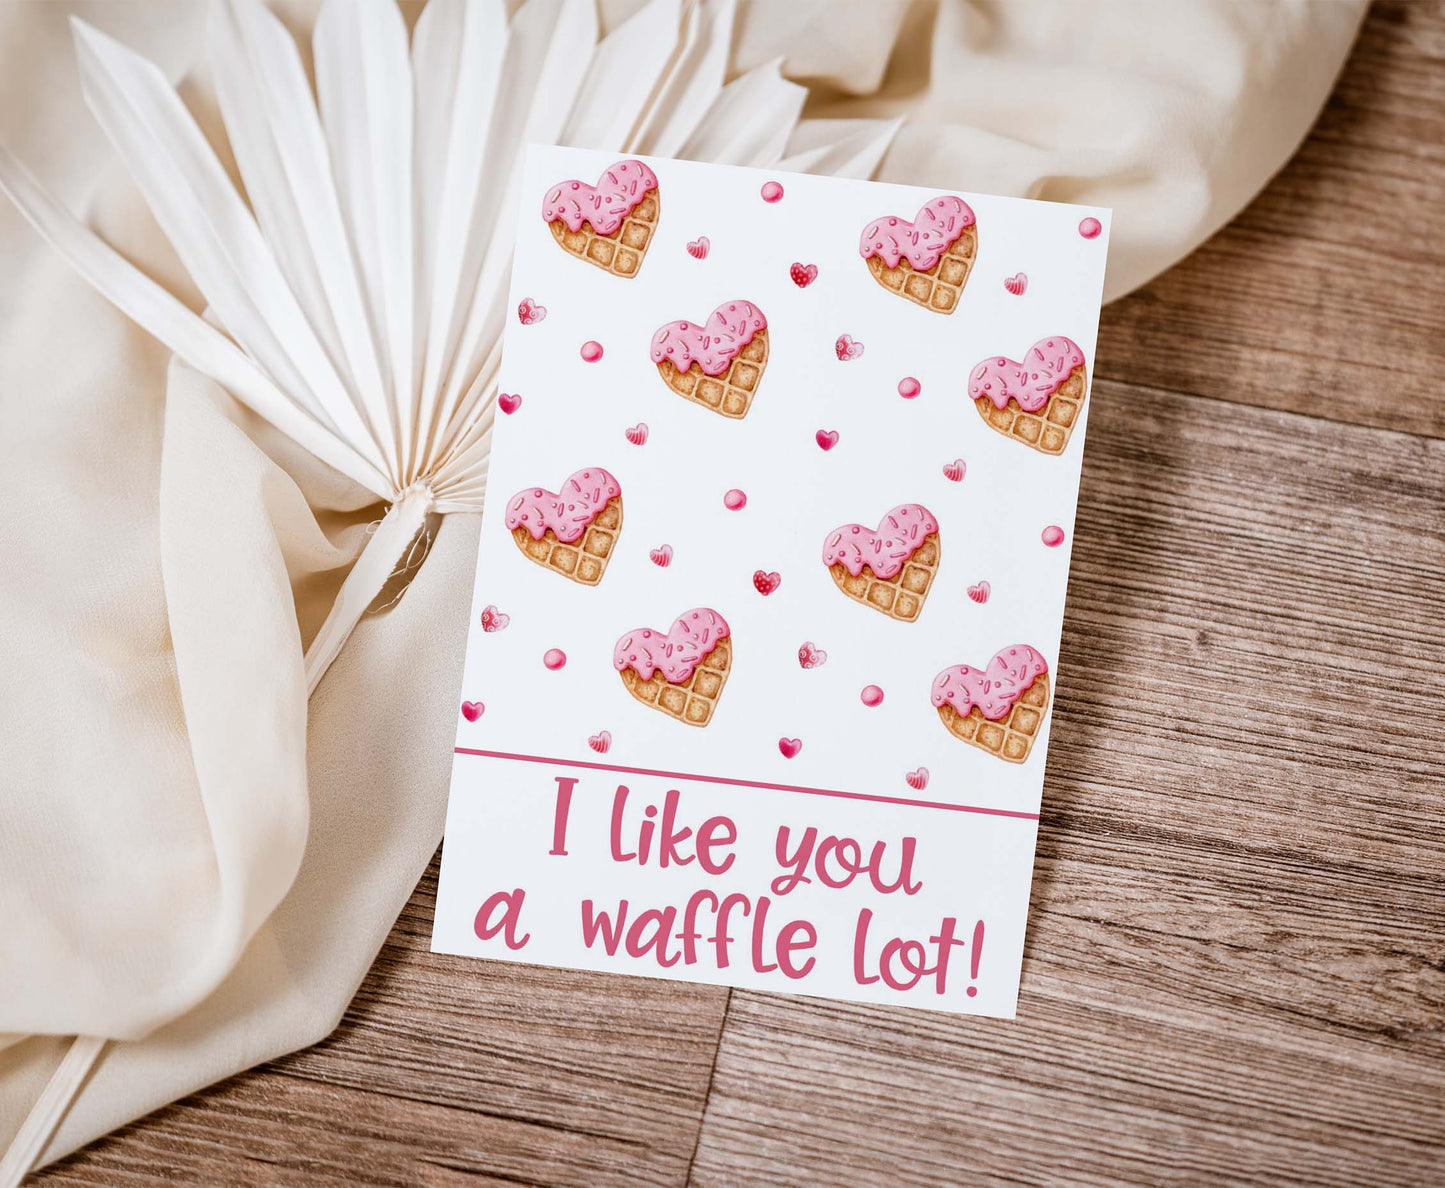 I like you Waffle lot Cookie Card | Valentines Printable Cards - 119